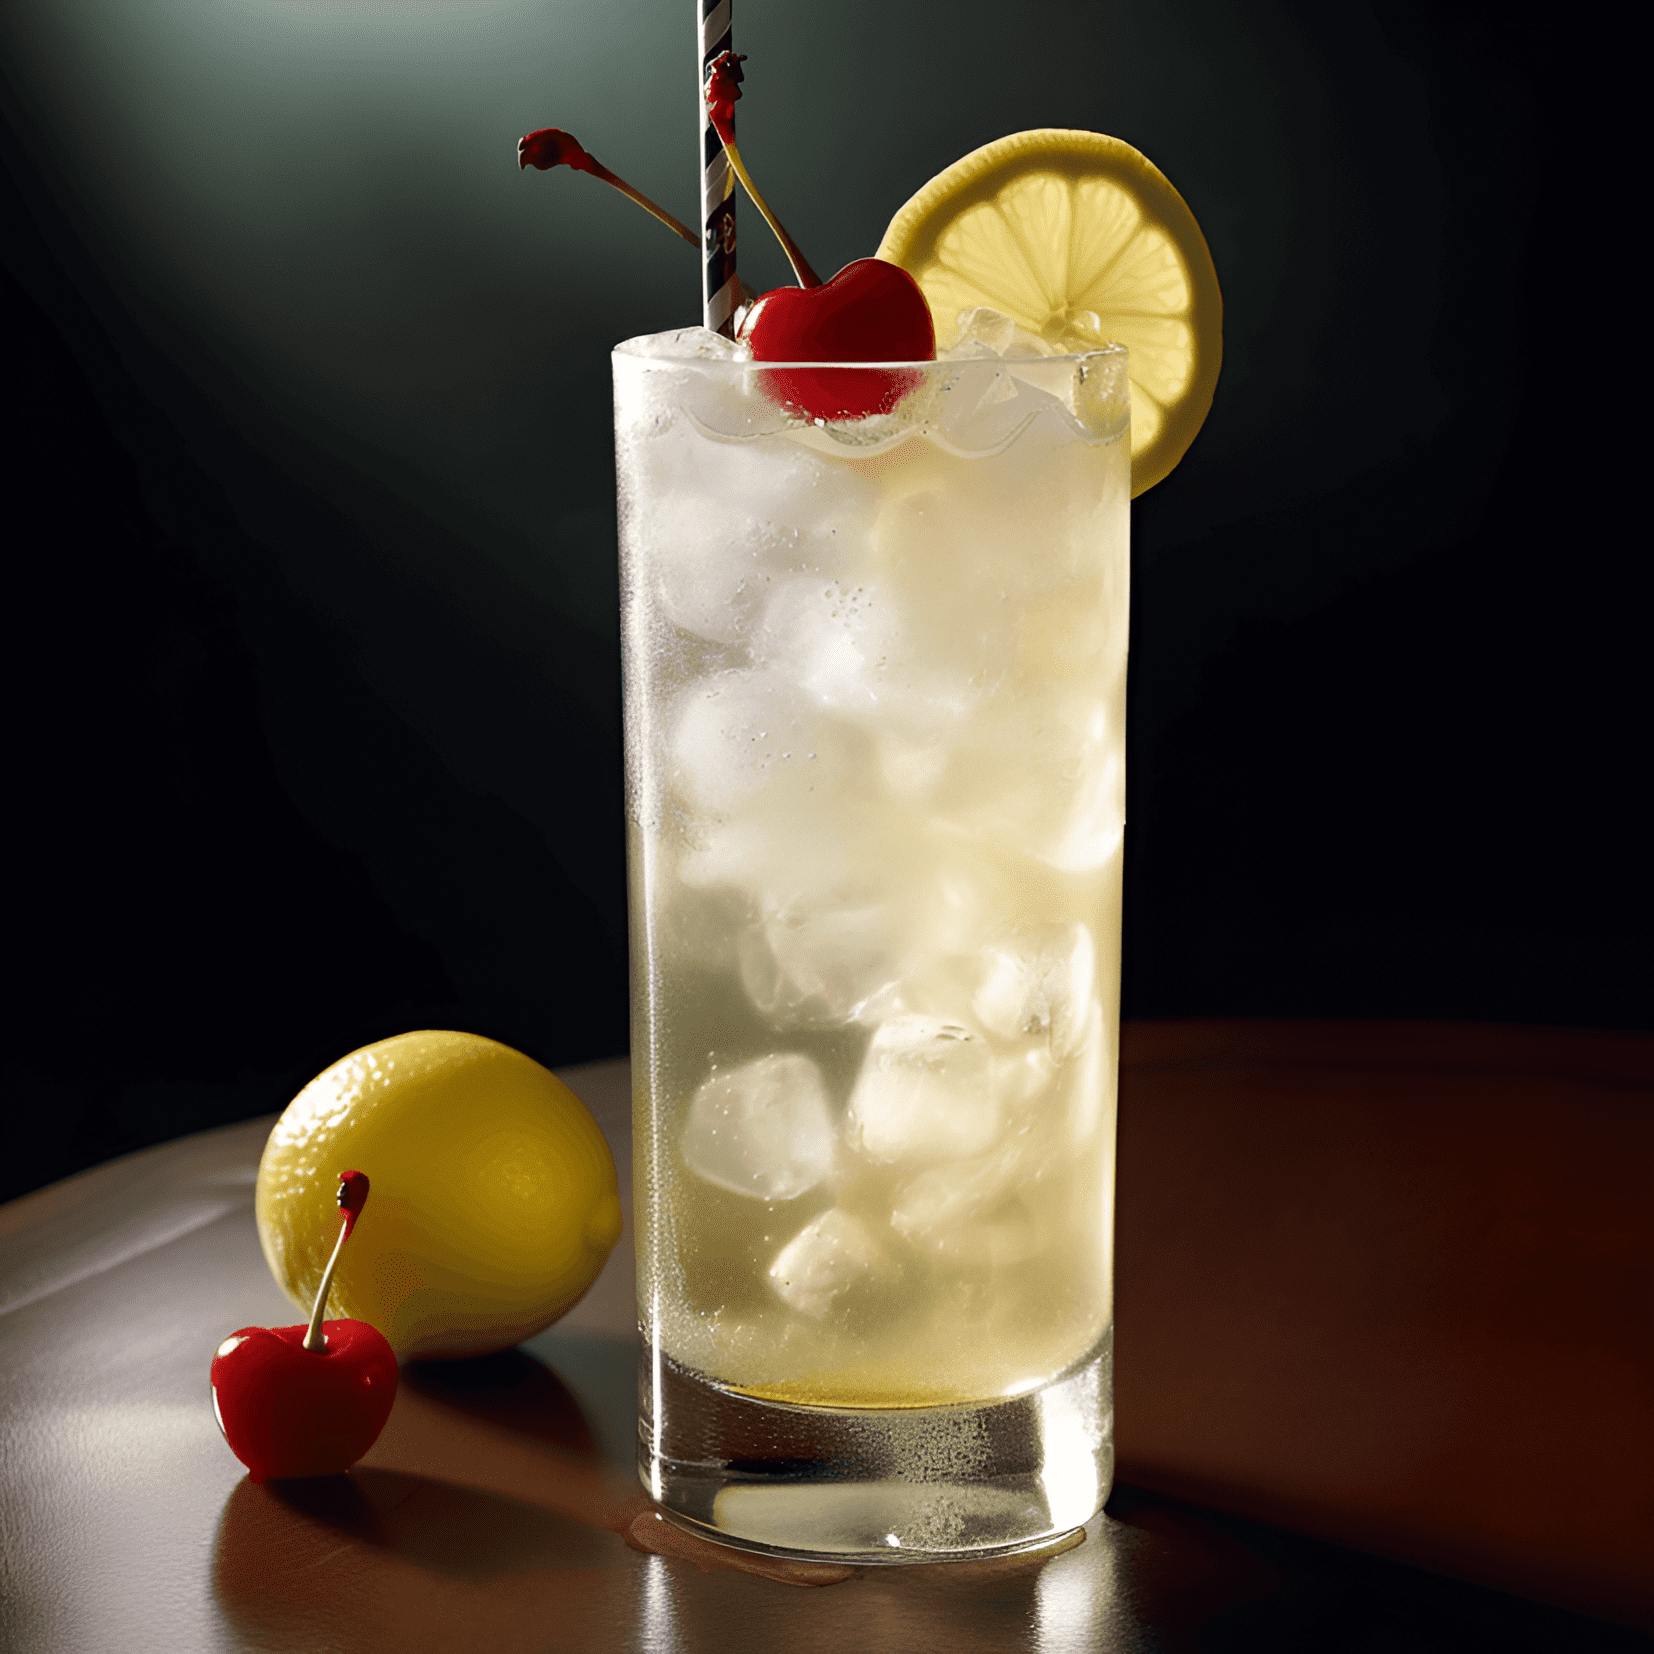 The Snowball cocktail has a creamy, sweet, and slightly tangy taste. The Advocaat provides a rich, velvety texture, while the lemon-lime soda adds a refreshing, fizzy element. The maraschino cherry and mint garnish contribute a touch of sweetness and a hint of cool, herbal flavor.